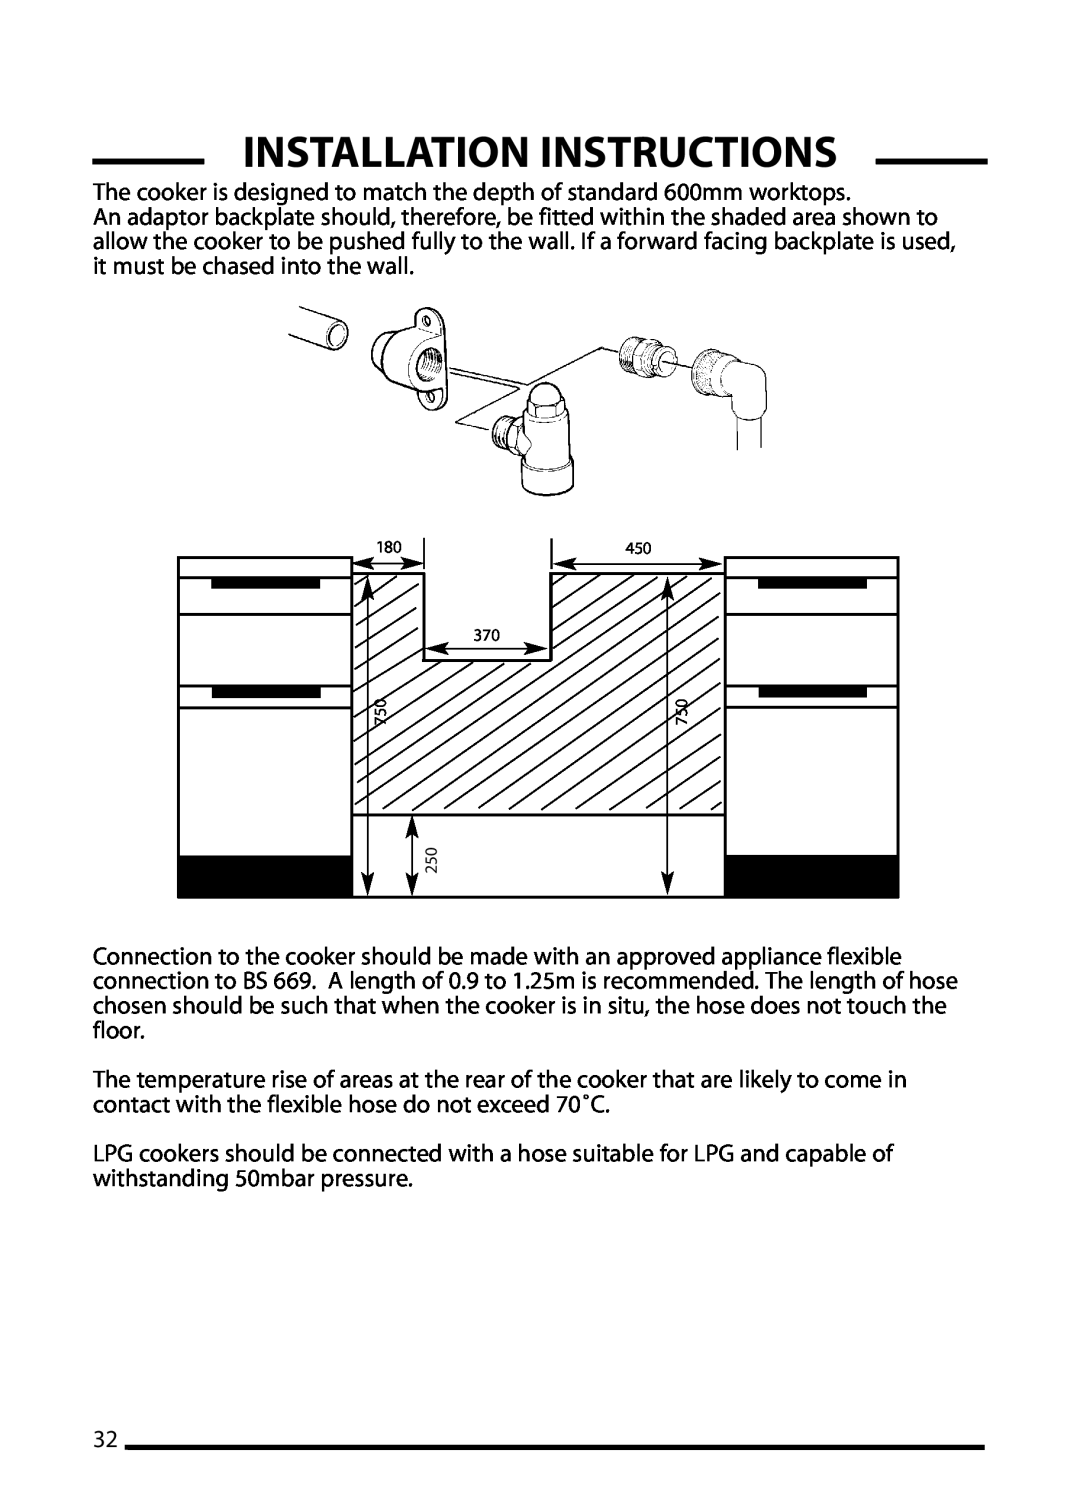 Cannon 10455G, 10450G Installation Instructions, The cooker is designed to match the depth of standard 600mm worktops 